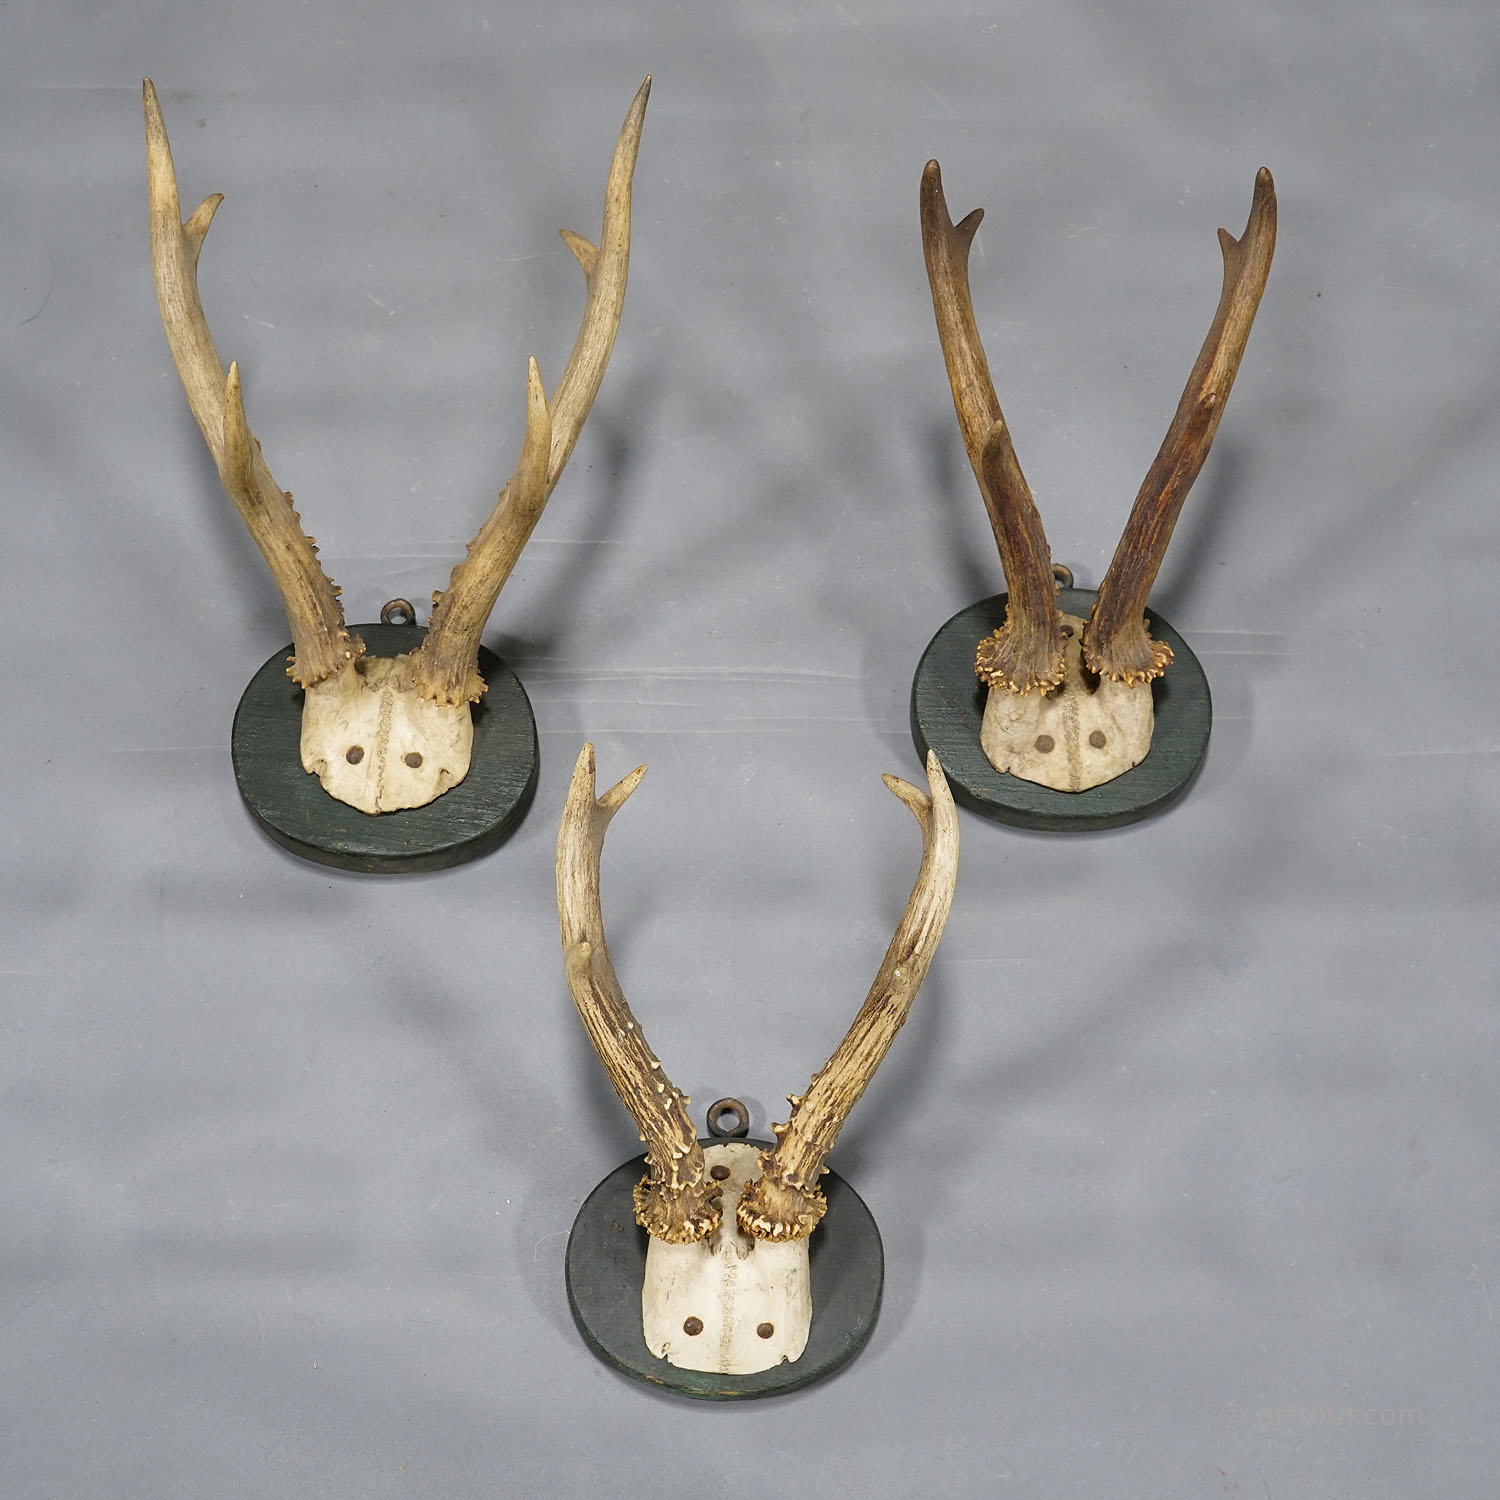 A Set of Six Antique Black Forest Deer Trophies on Wooden Plaques 1880s